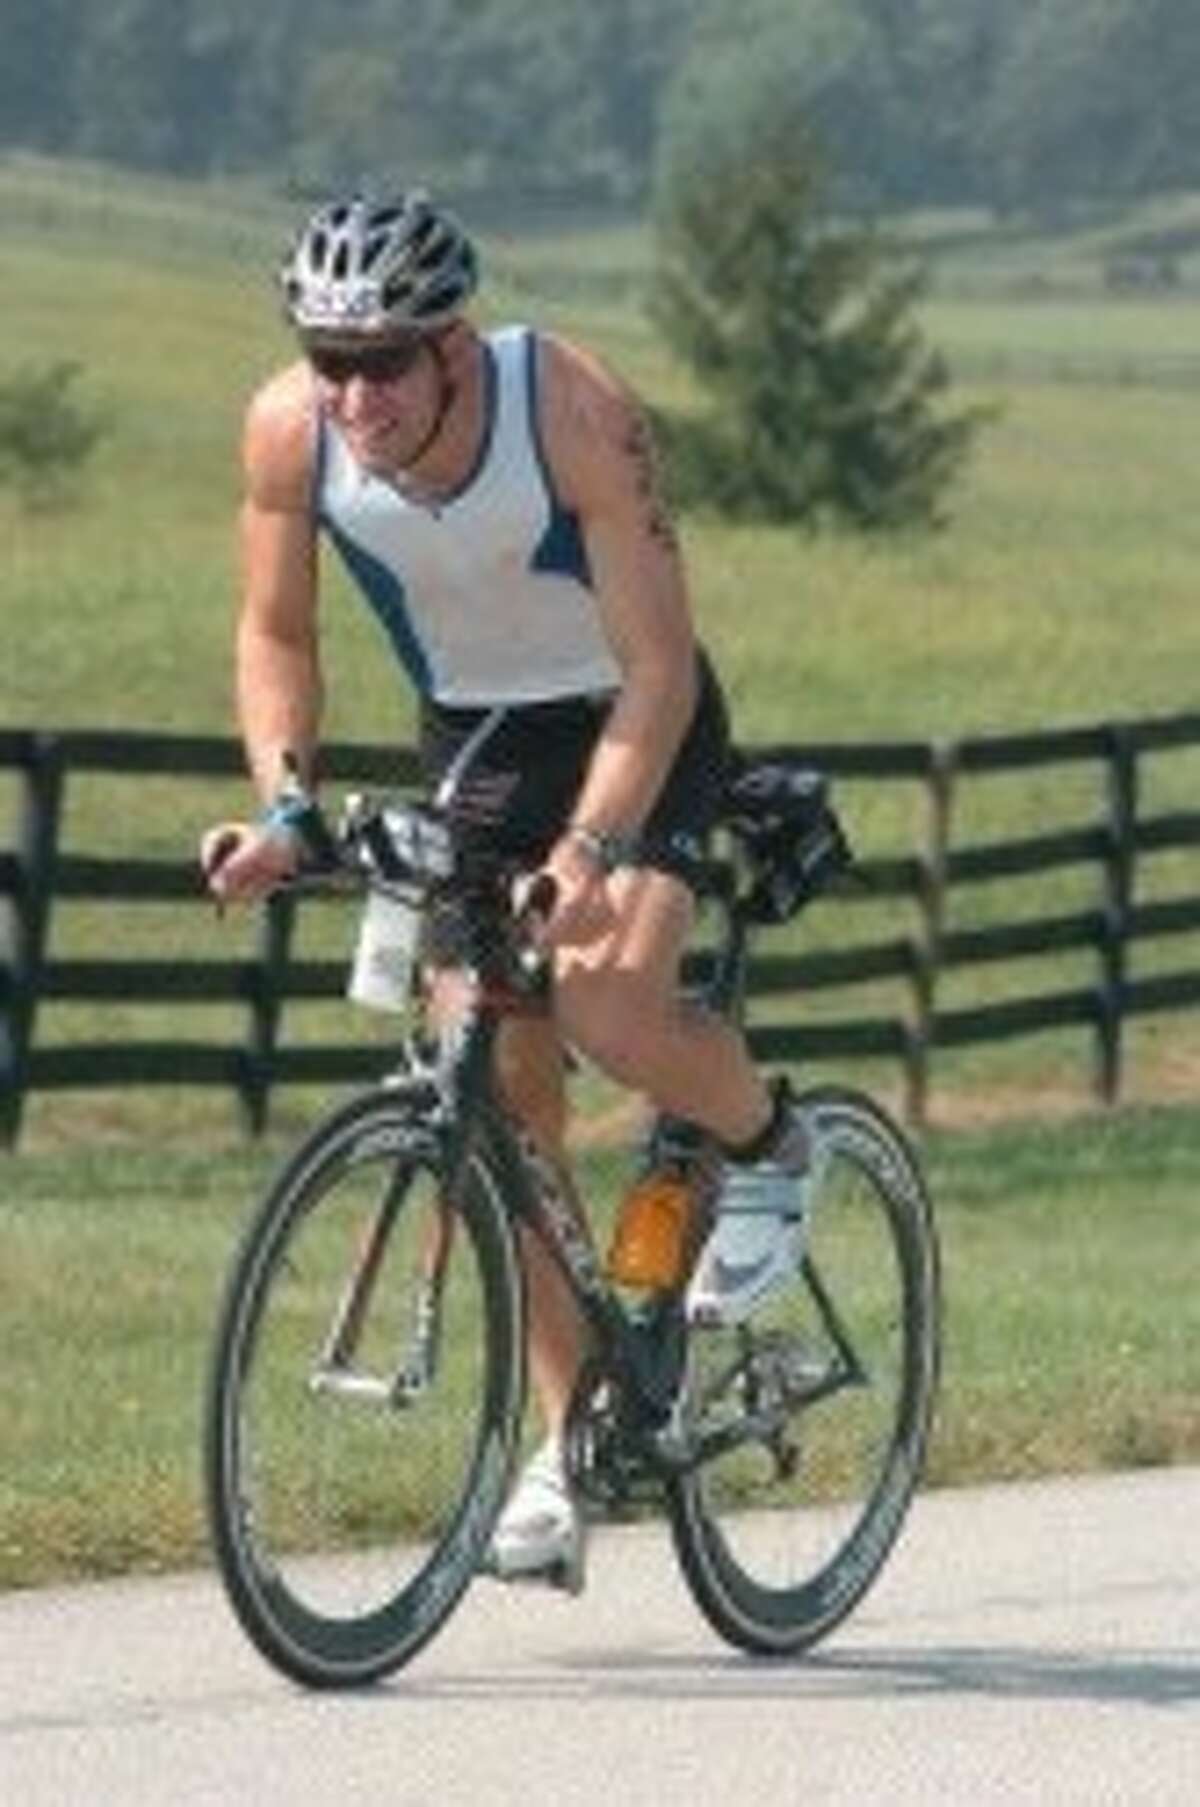 After swimming 2.4 miles, the 3,000 competitors in Ironman competition in Louisville, Ky. on Aug. 25 then bicycled 112 miles and followed that by running 26.2 miles. Manistee native Jason Dierking, seen here, competed to raise money for the Frazier Rehab Institute. (Courtesy Photo)